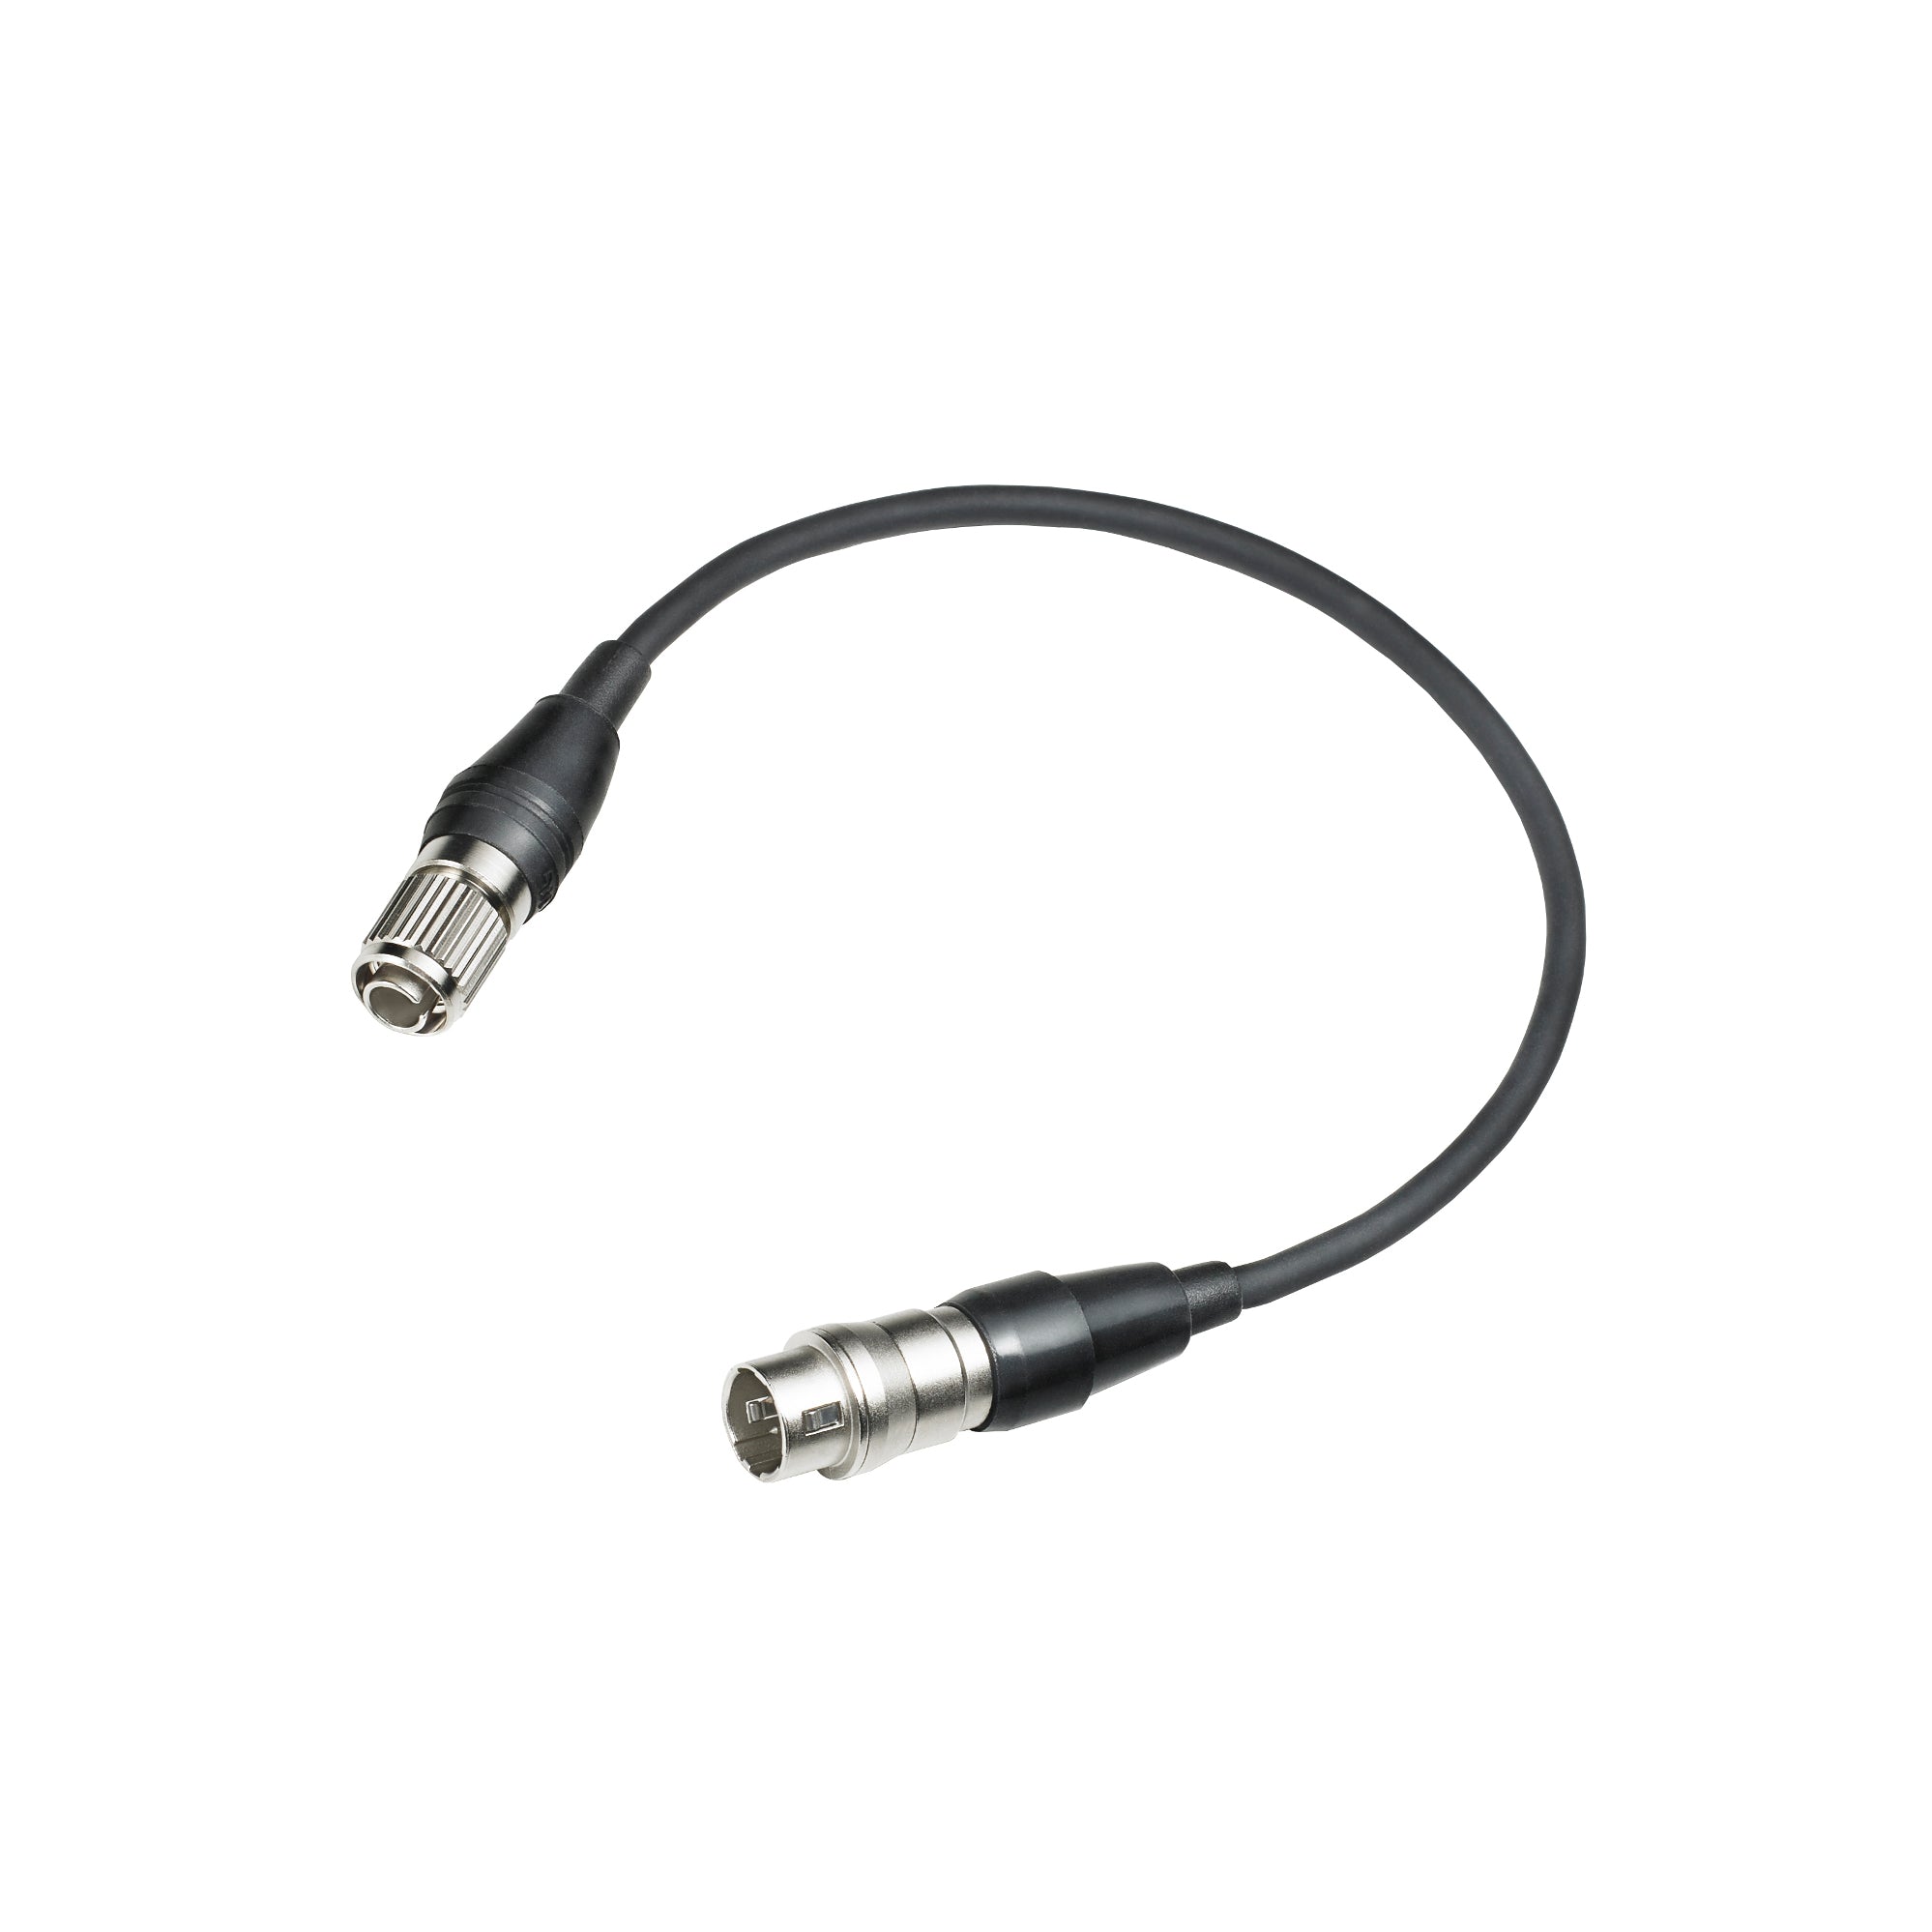 Audio-Technica AT-CWCH Adapter Cable for 4th Gen 3000 Series